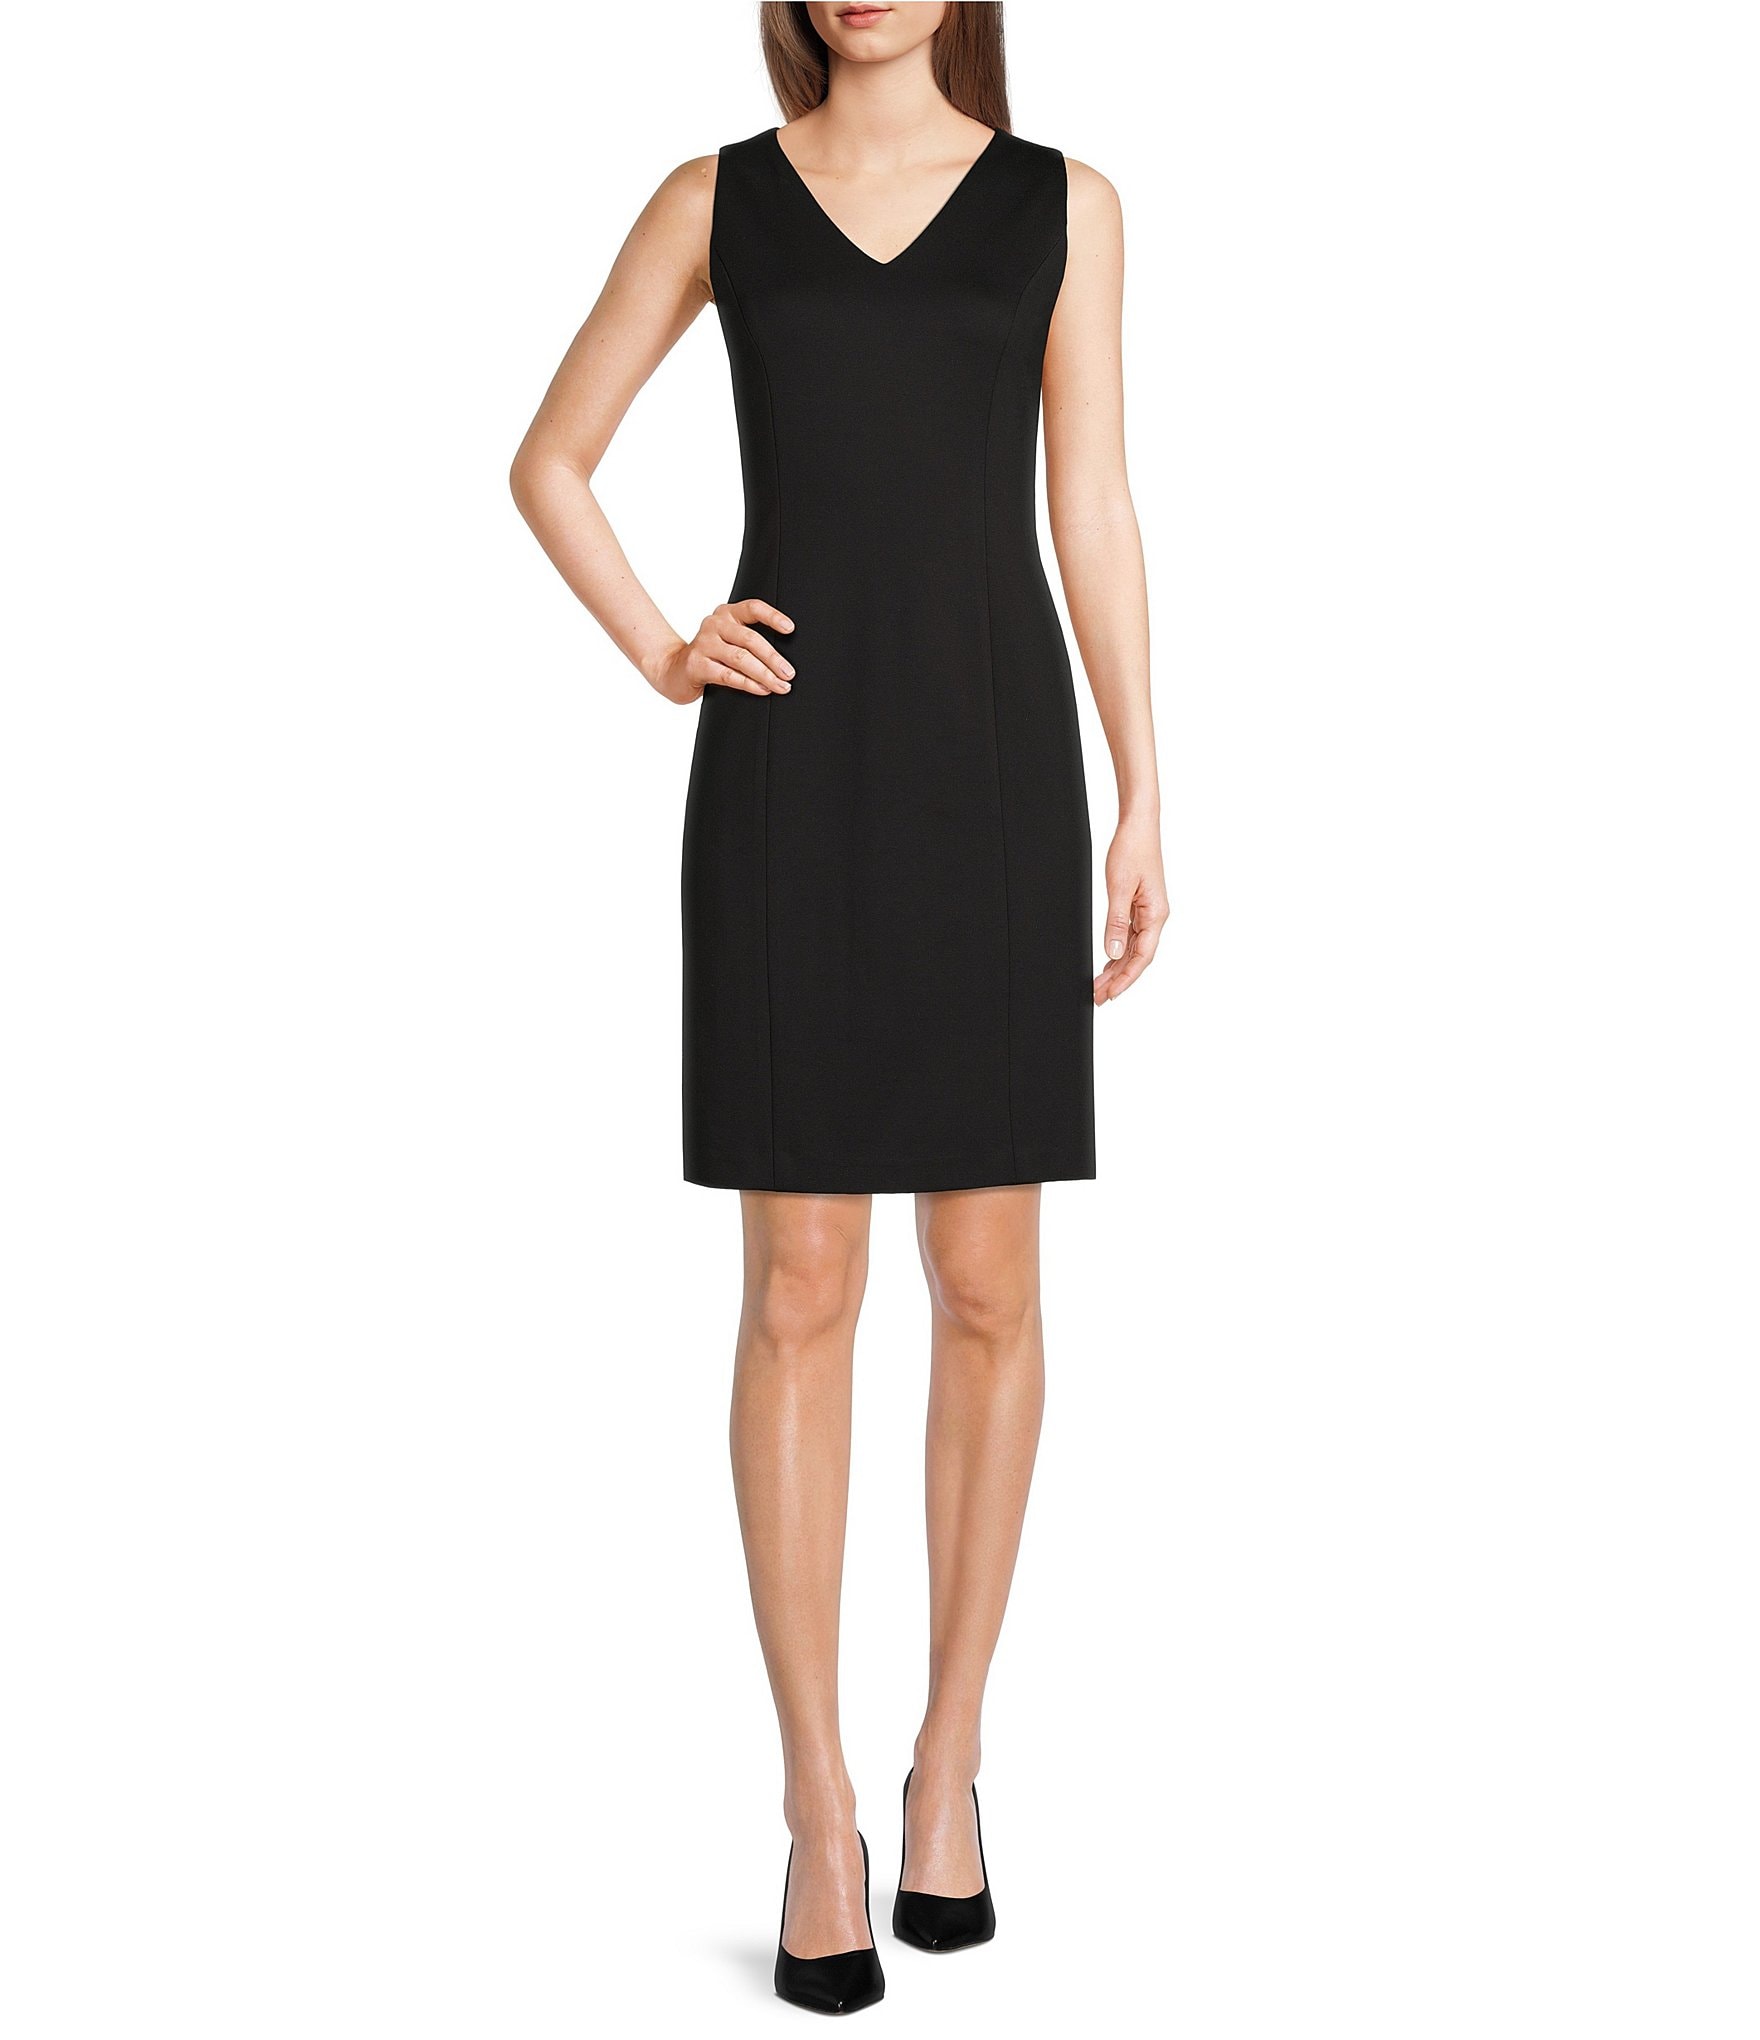 black back on see: Women's Cocktail & Party Dresses | Dillard's